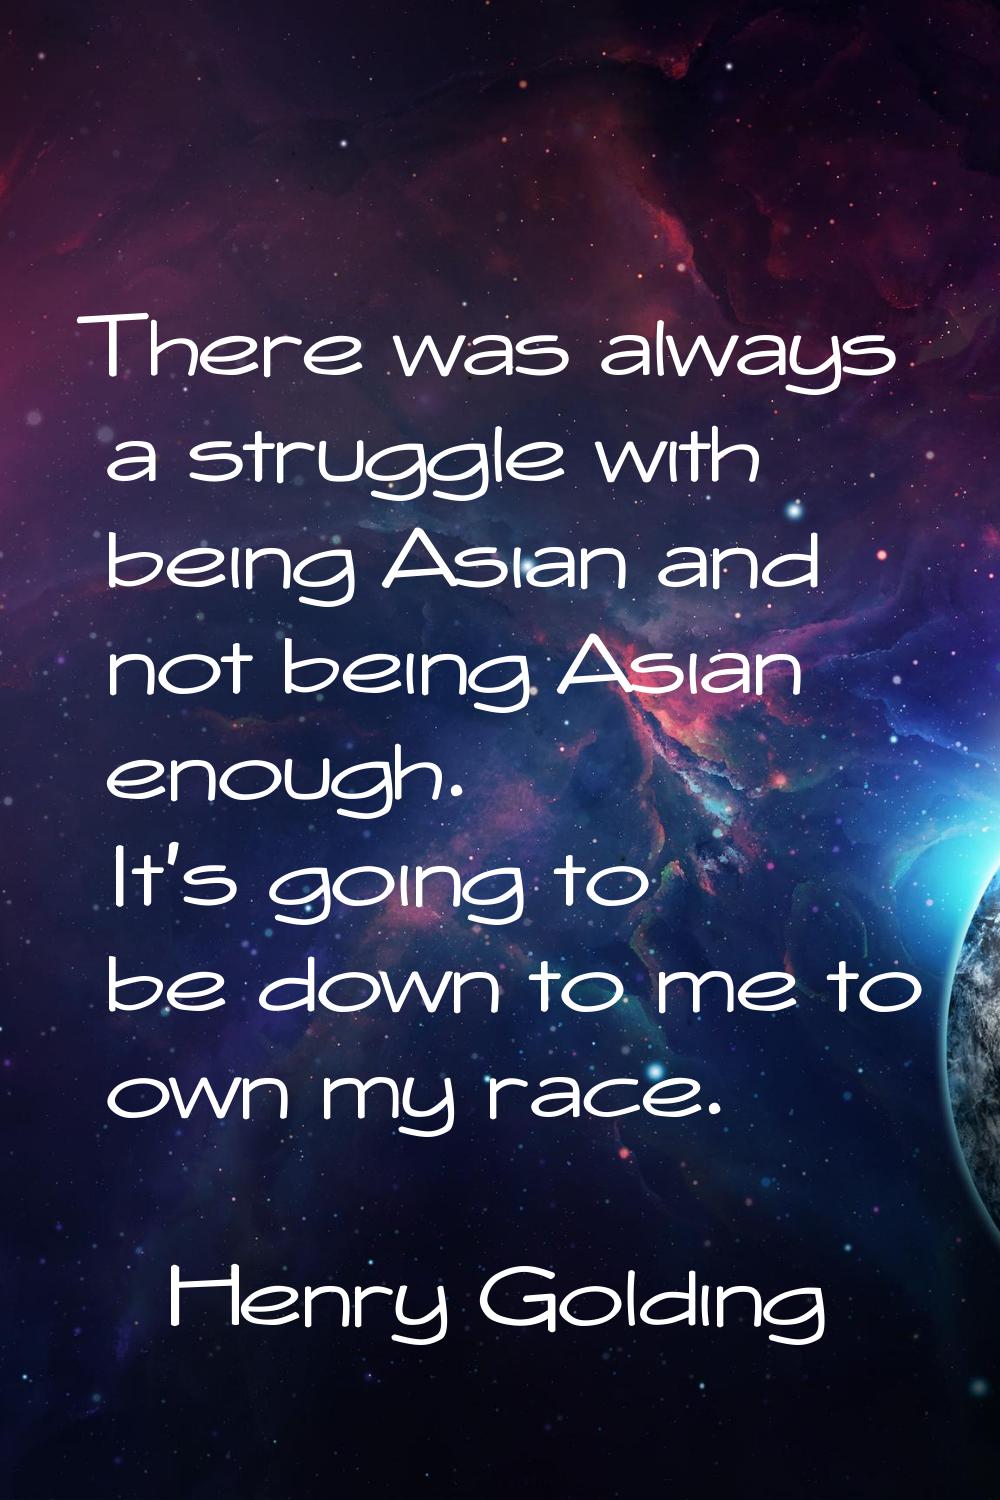 There was always a struggle with being Asian and not being Asian enough. It's going to be down to m